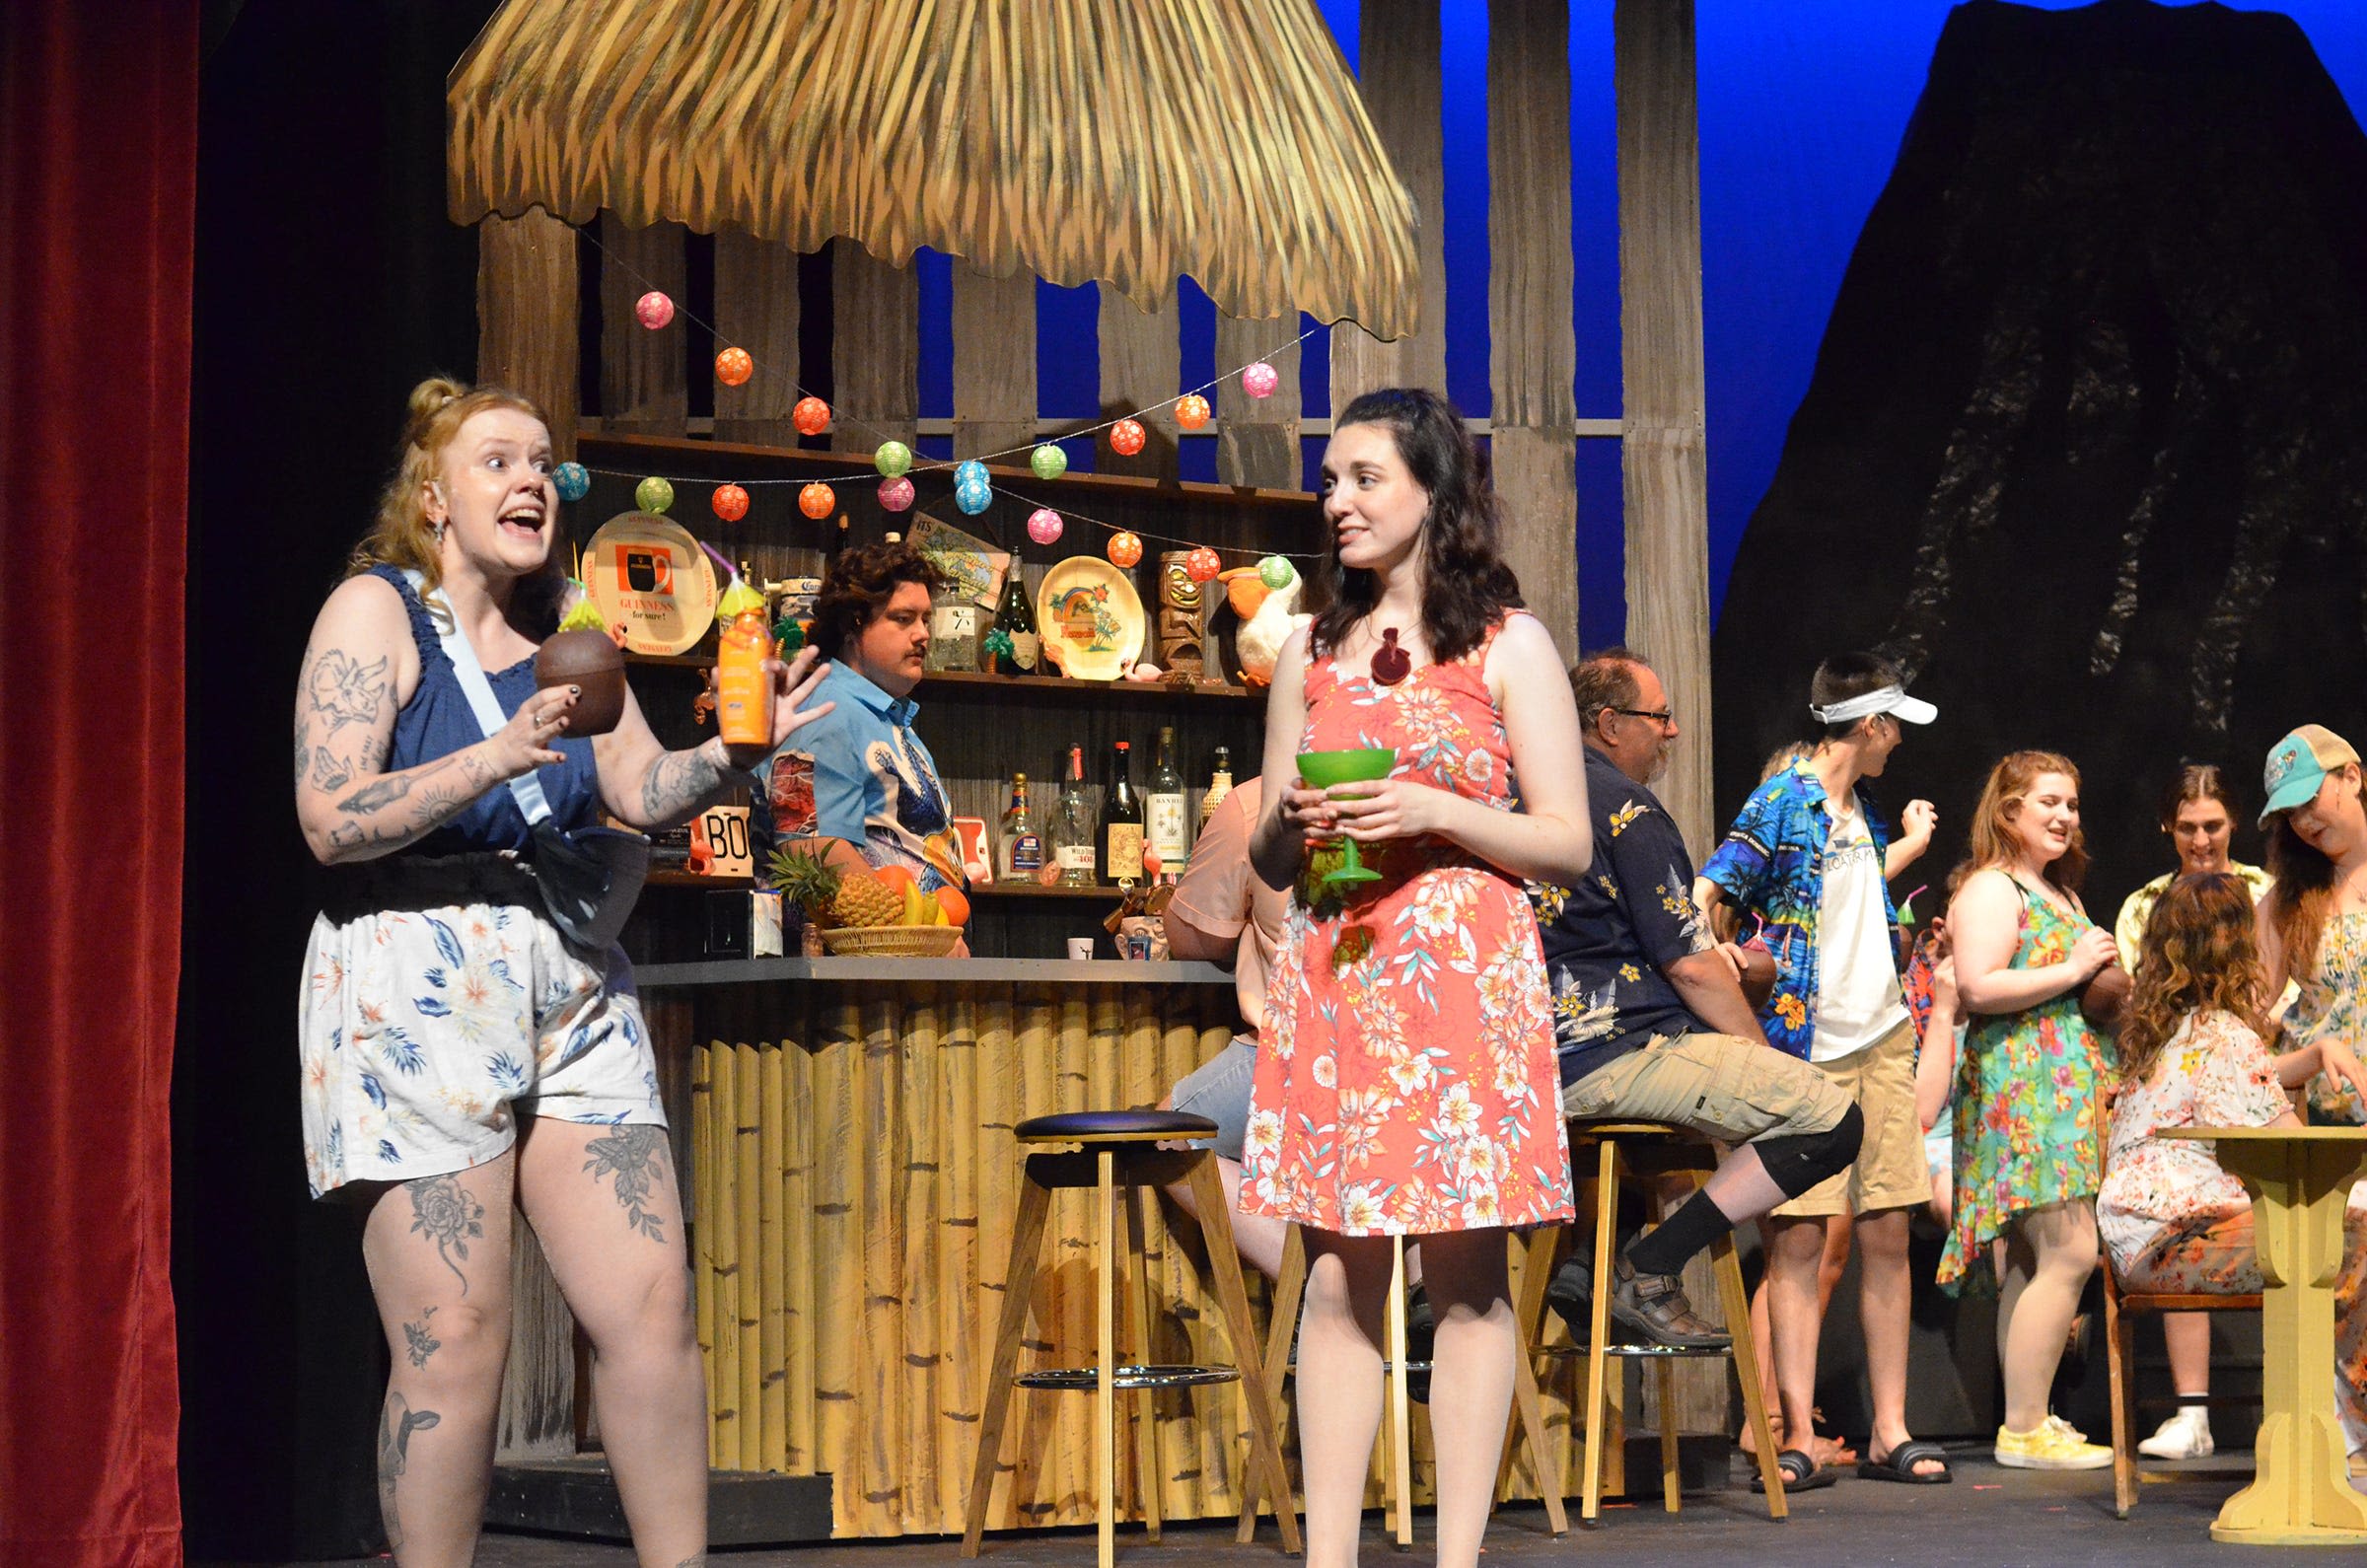 'Escape to Margaritaville' a breezy, upbeat showcase of Jimmy Buffet tunes at Croswell